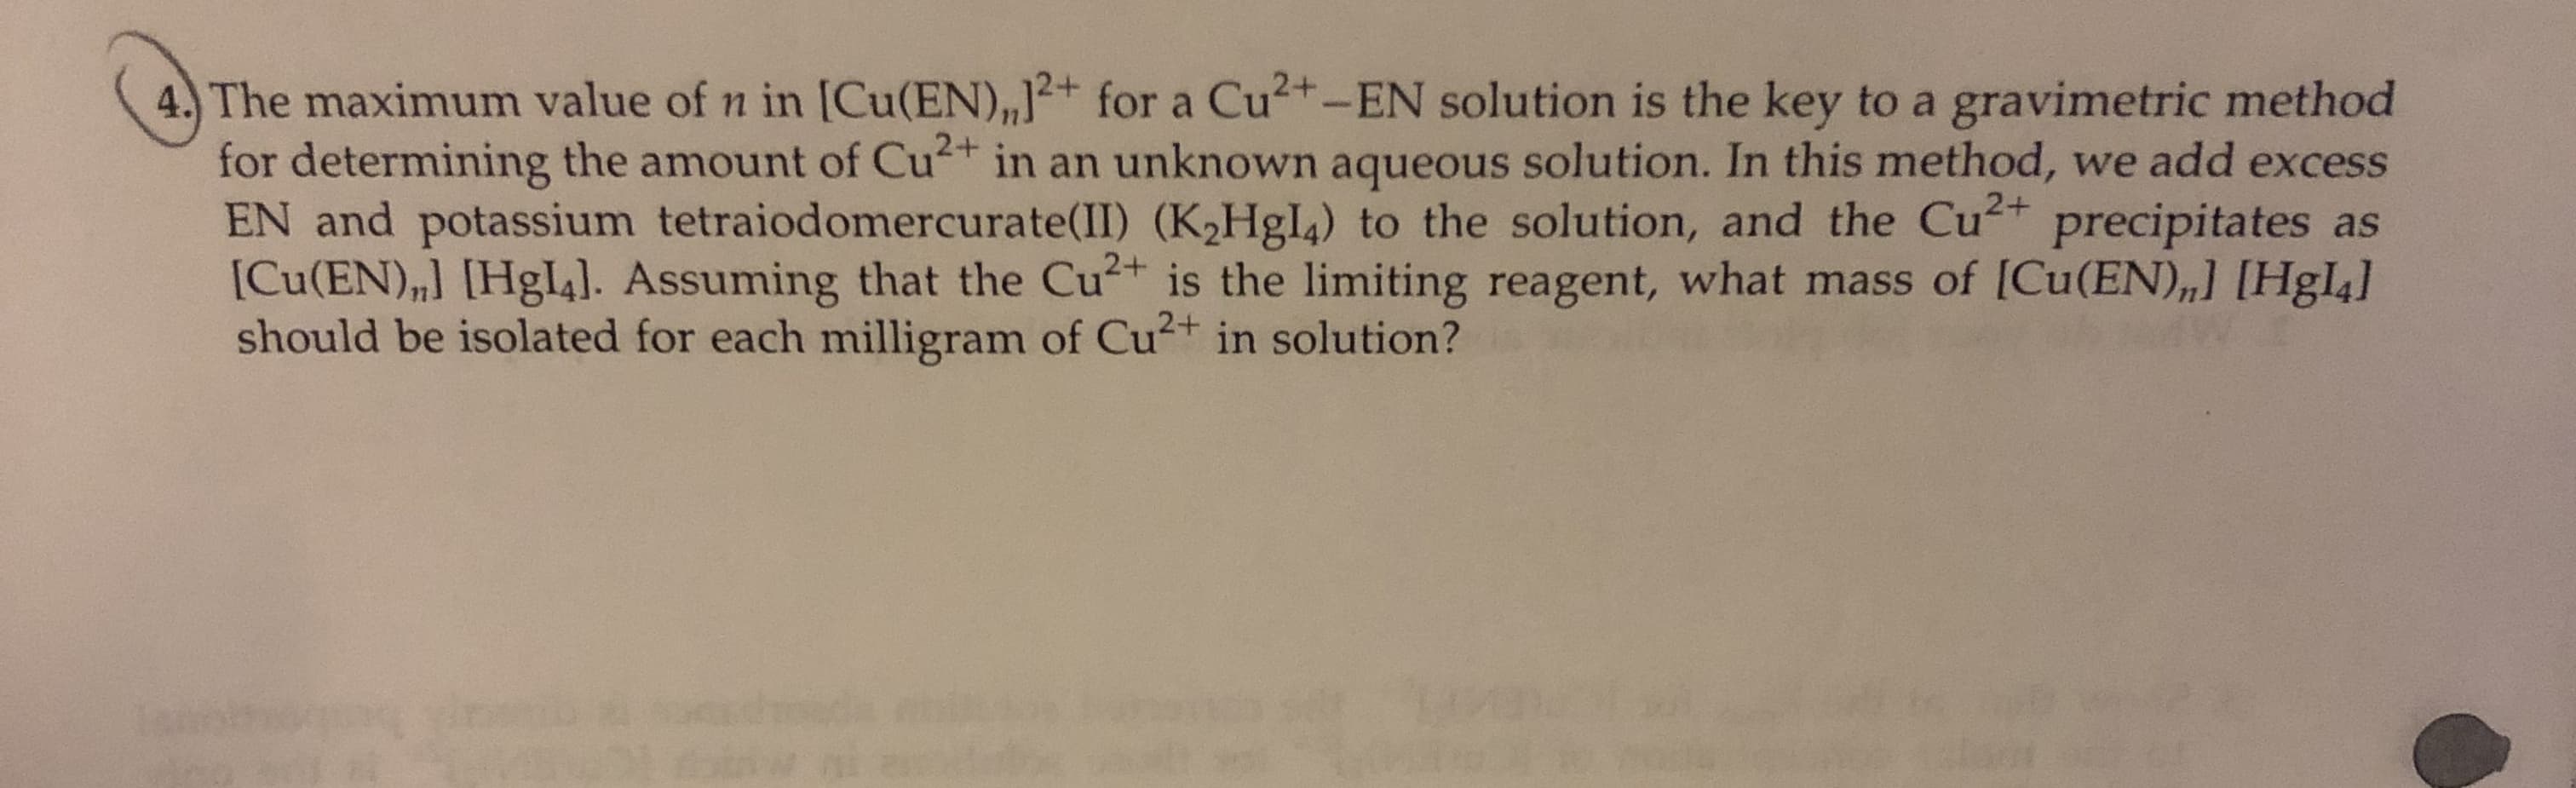 4. The maximum value of n in [Cu(EN),,J for a Cu2+-EN solution is the key to a gravimetric method
for determining the amount of Cu in an unknown aqueous solution. In this method, we add excess
EN and potassium tetraiodomercurate(II) (K2H8I4) to the solution, and the Cu precipitates as
[Cu(EN),] [Hgl4]. Assuming that the Cu is the limiting reagent, what mass of [Cu(EN),] [Hgl4]
should be isolated for each milligram of Cu2 in solution?
+
2+
2+
